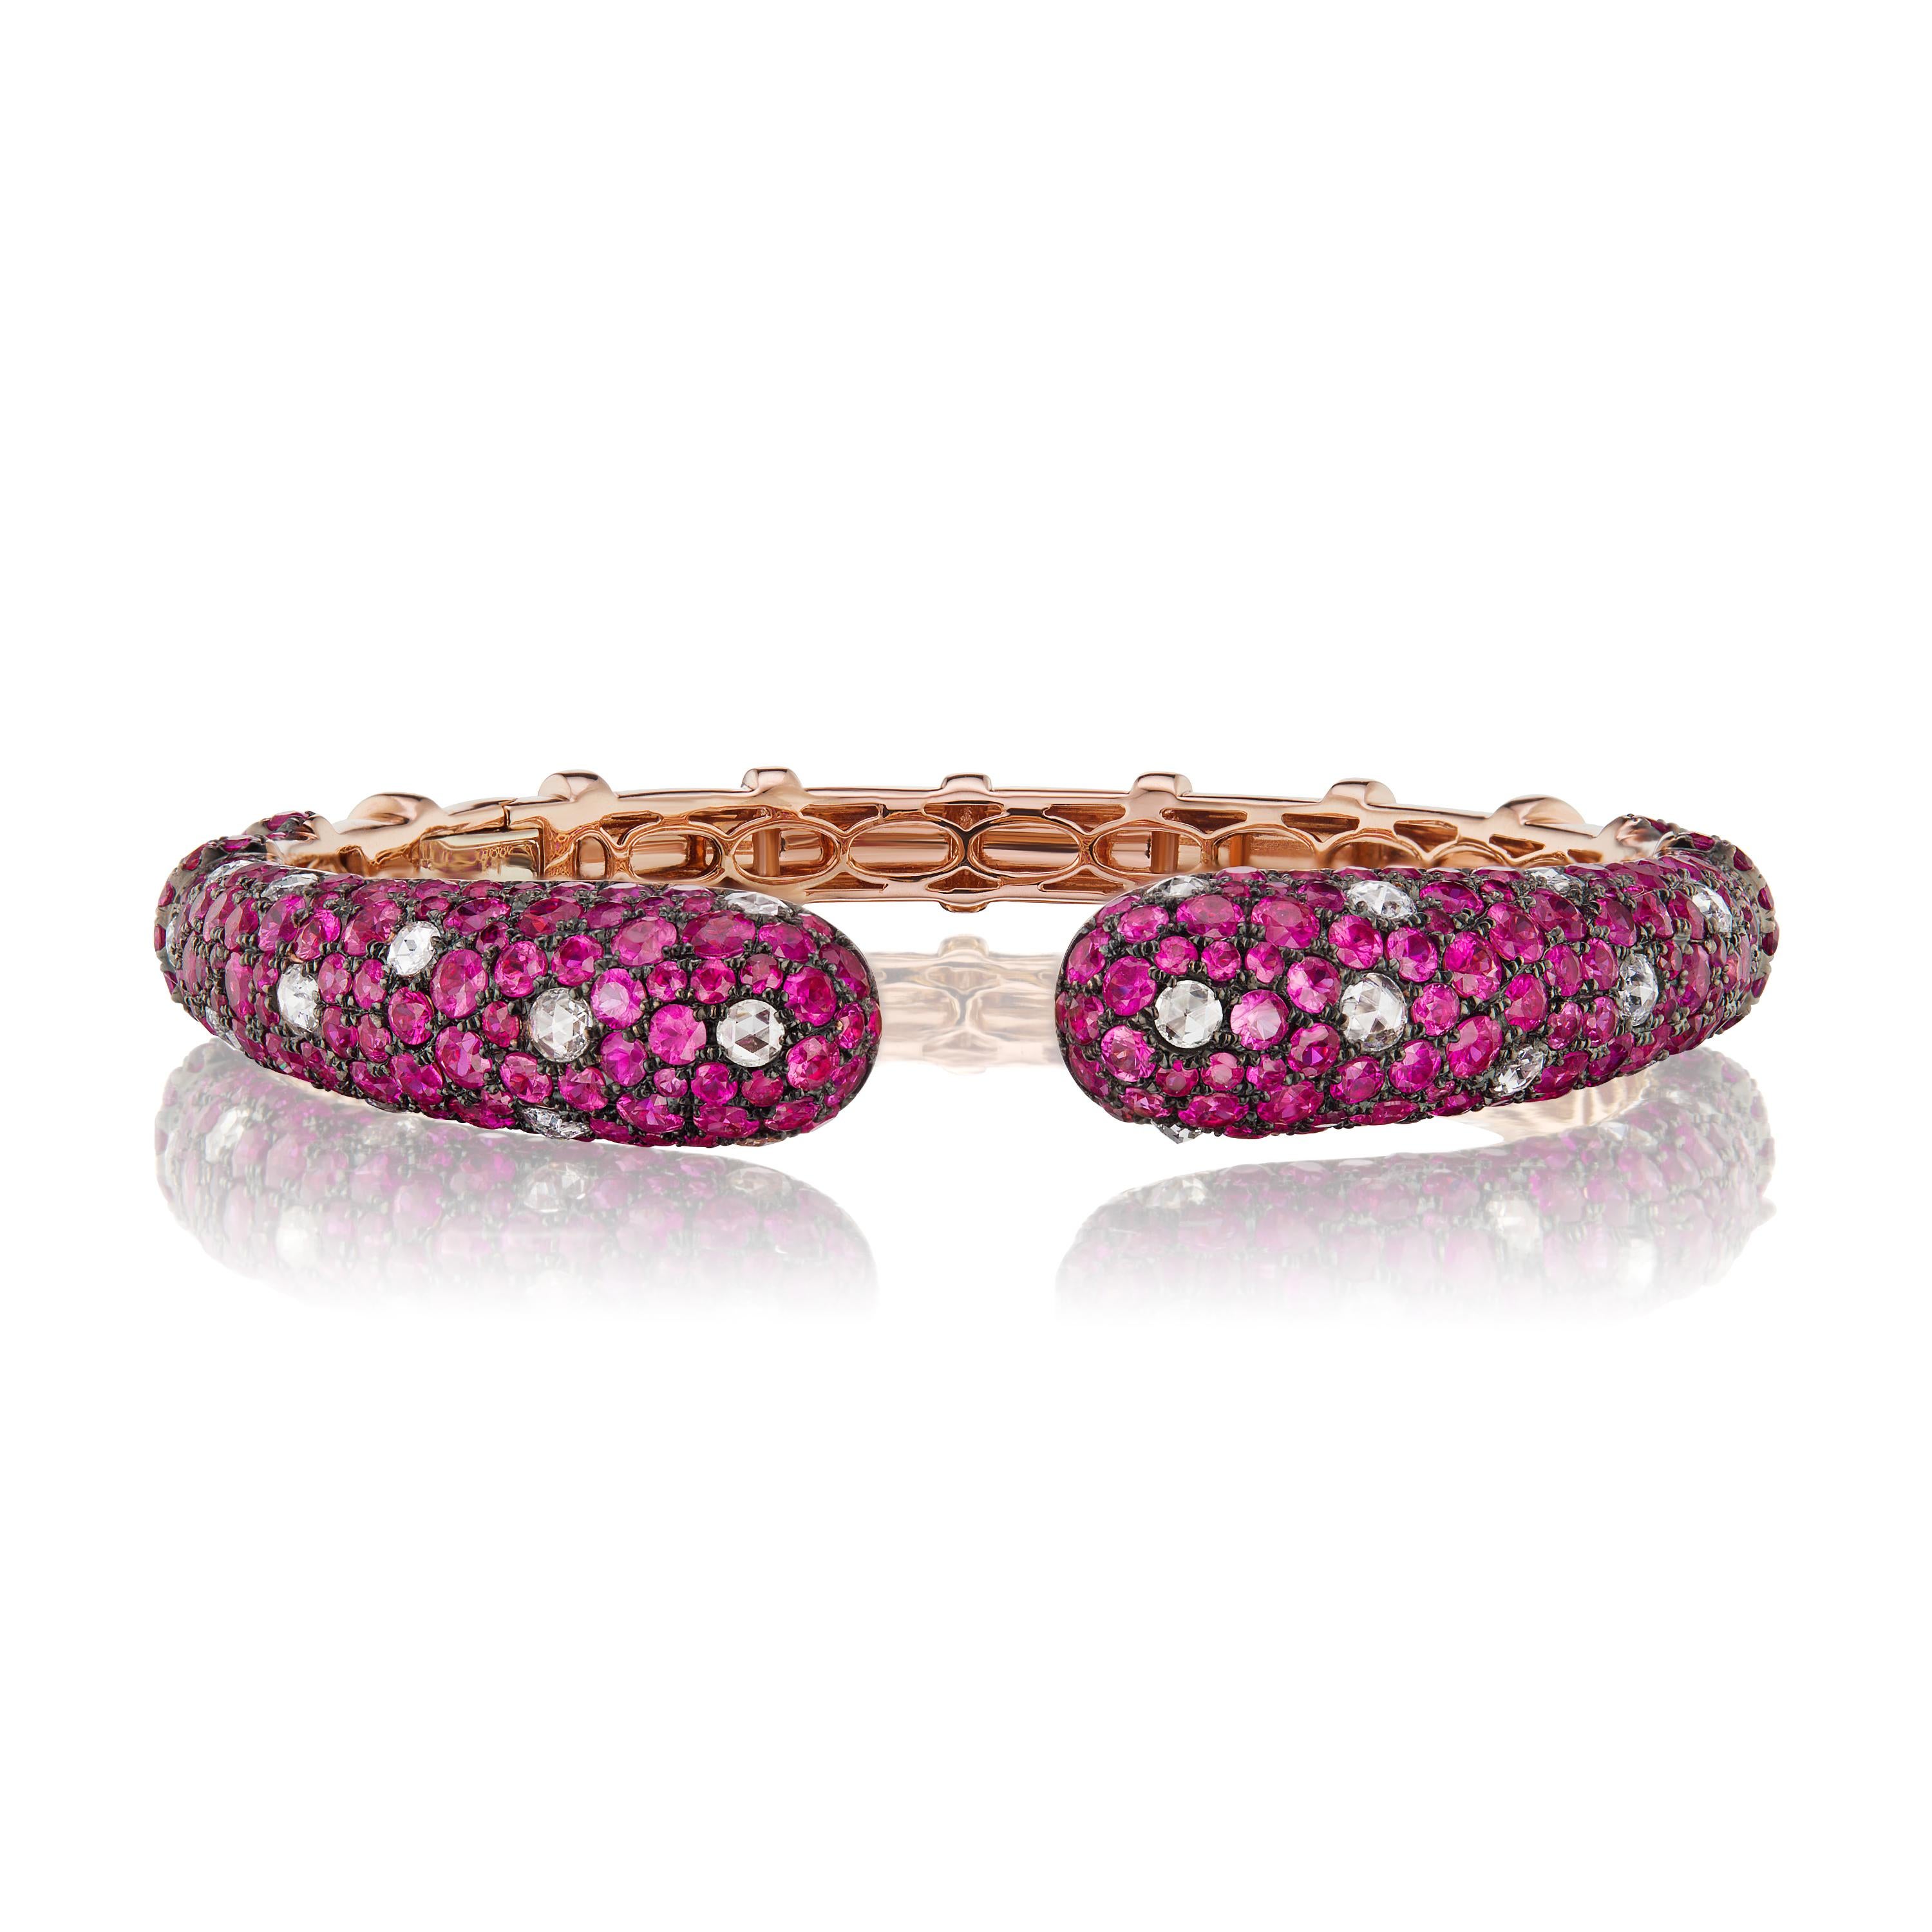 The Ruby cuff bangle has an immaculate look, crafted with 12.81 carats ruby and 1.45-carat round-rose cut diamonds on 18 karat rose gold by Nigaam. The cuff bangle is studded with prong set round rubies and diamonds. The diamonds are of G-H color